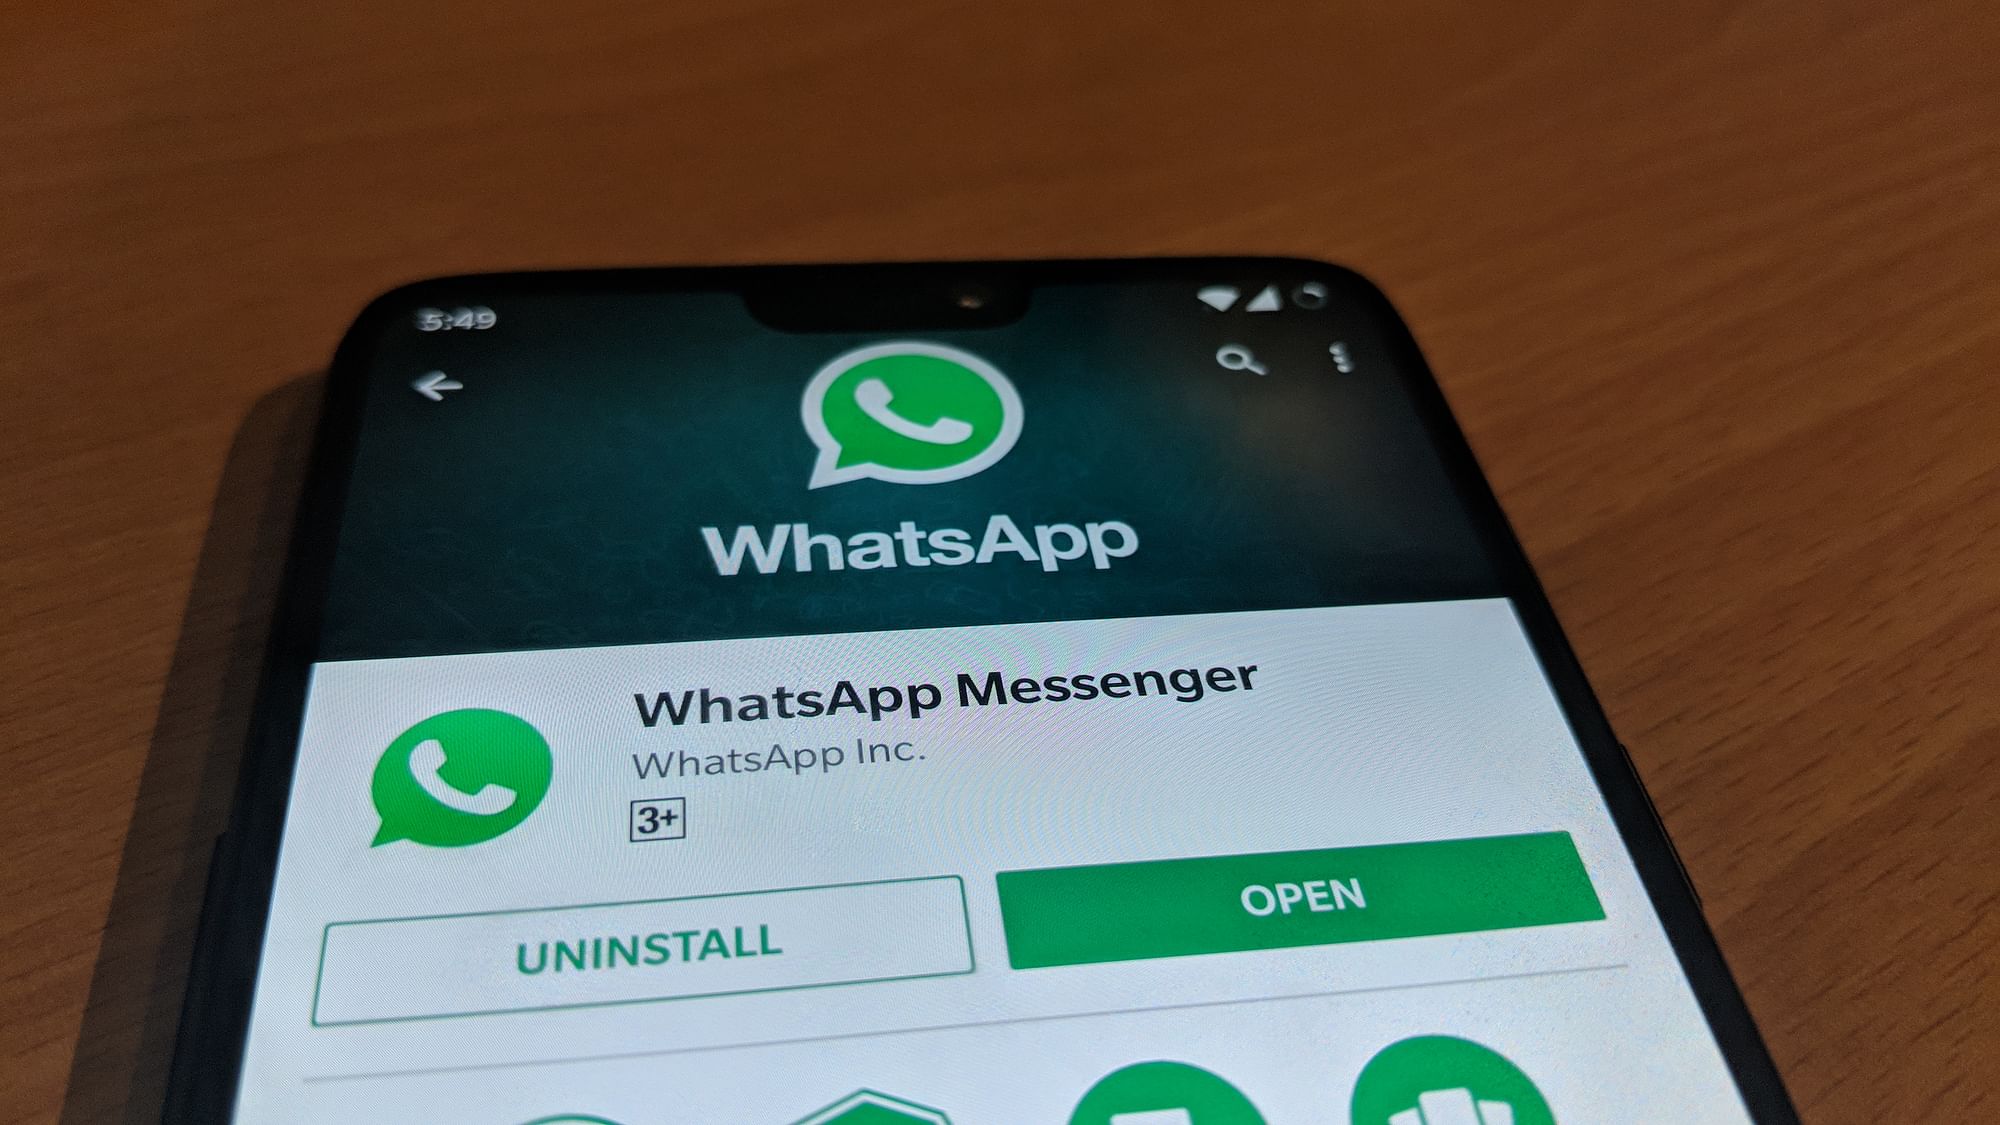 whatsapp login with phone number online